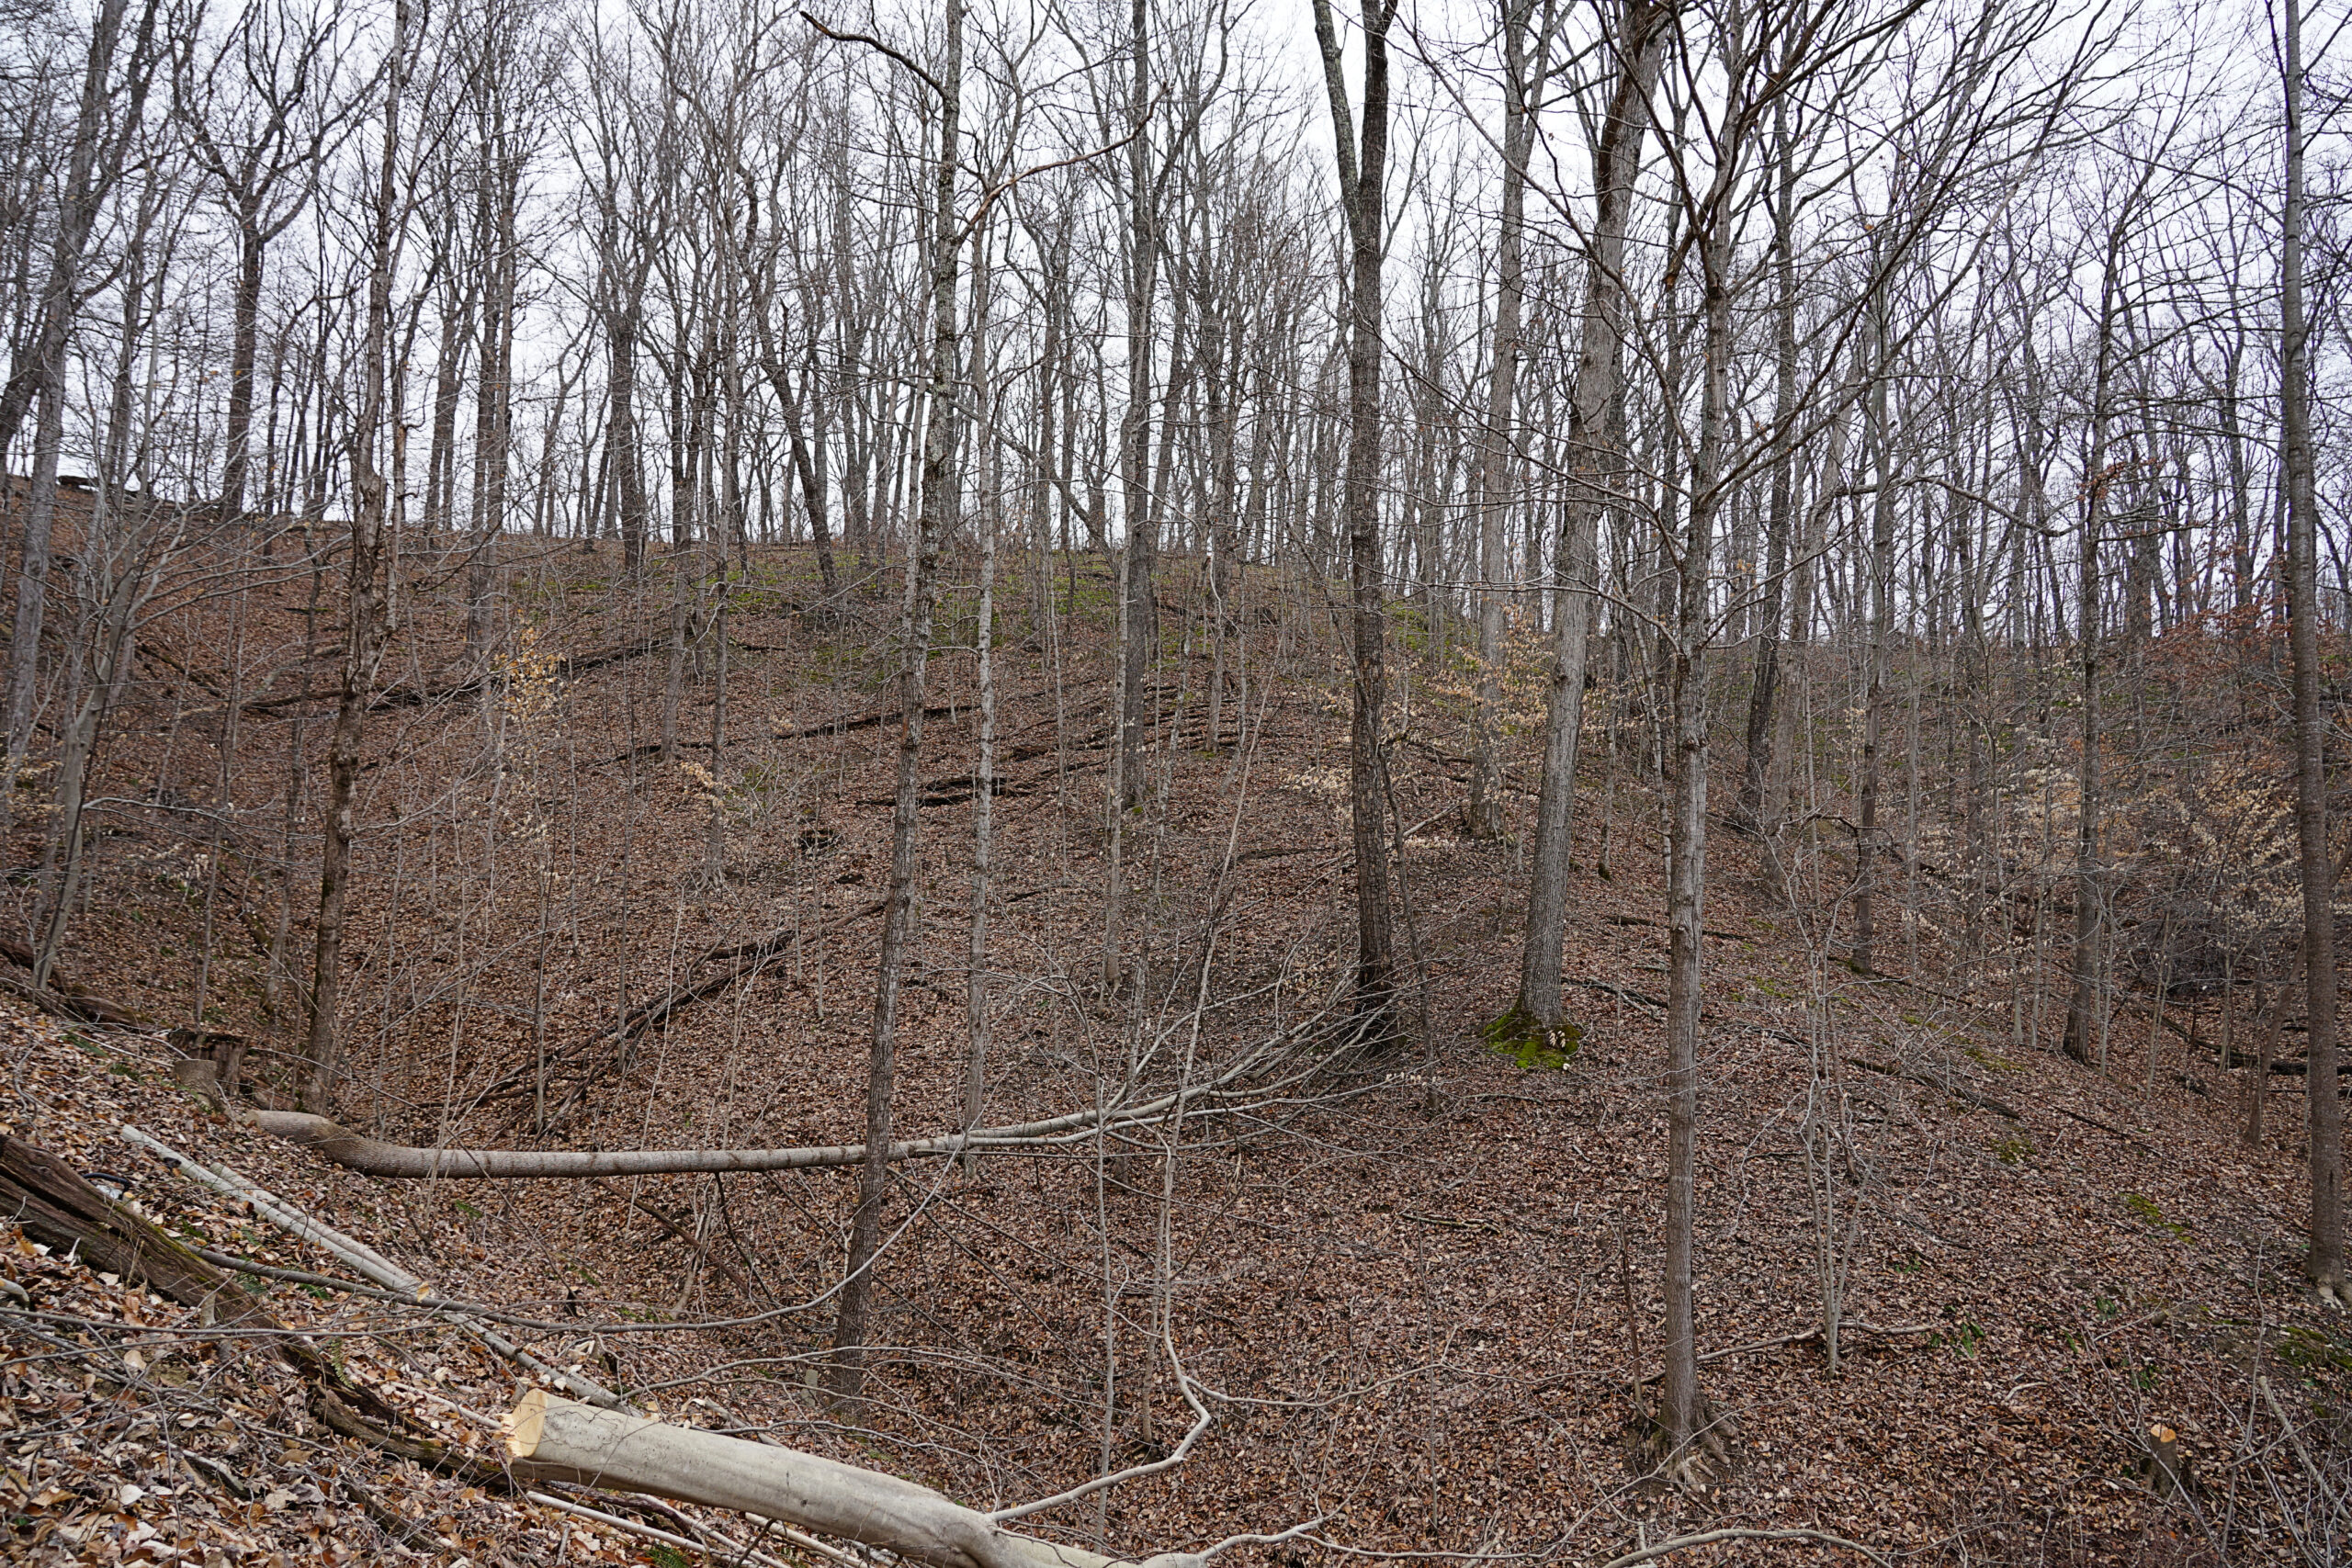 An image of a timber stand before thinning operations, a mid-story removal, is conducted on the forest.